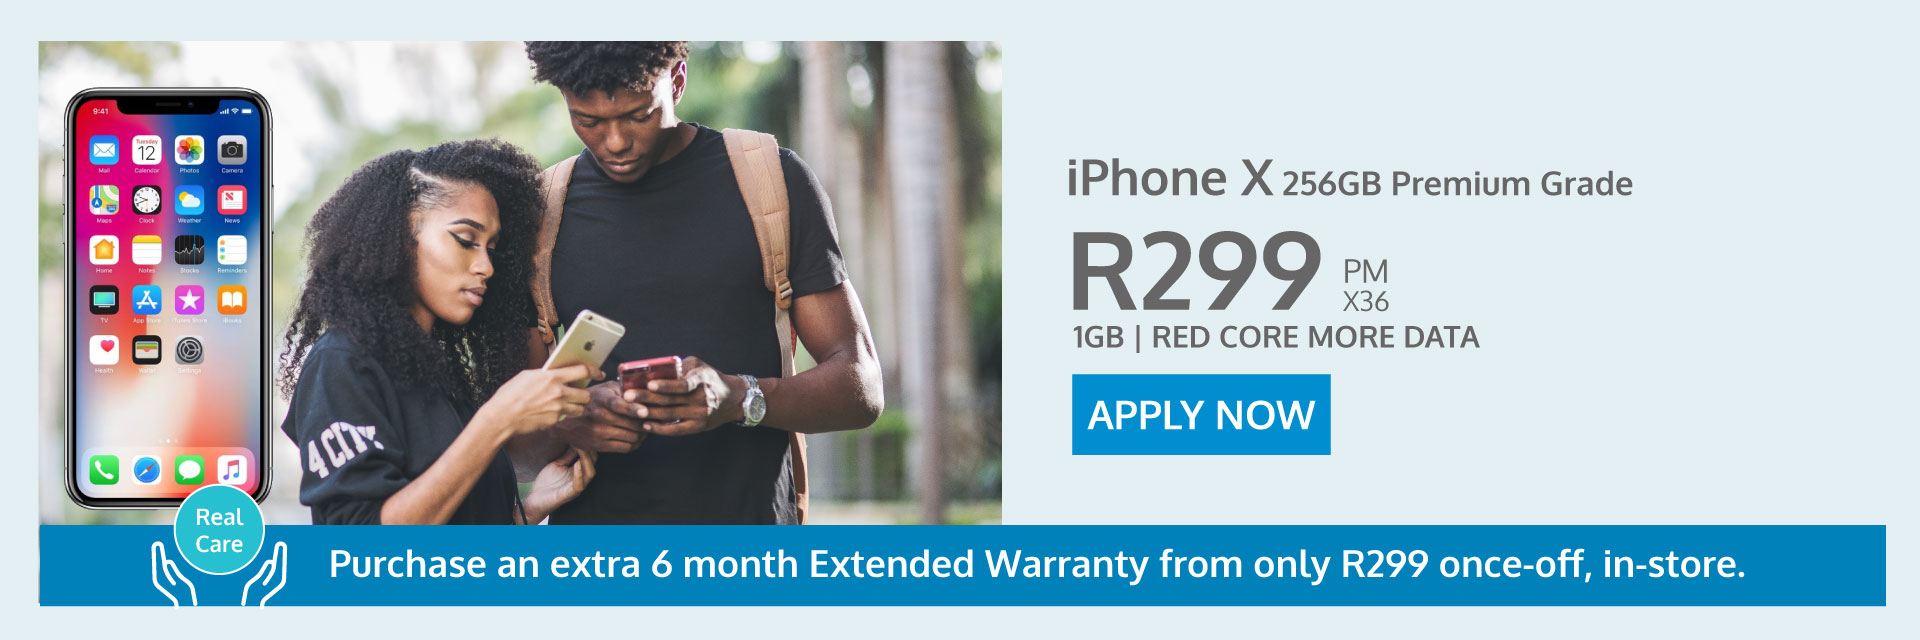 iPhone x pre owned contract deal banner